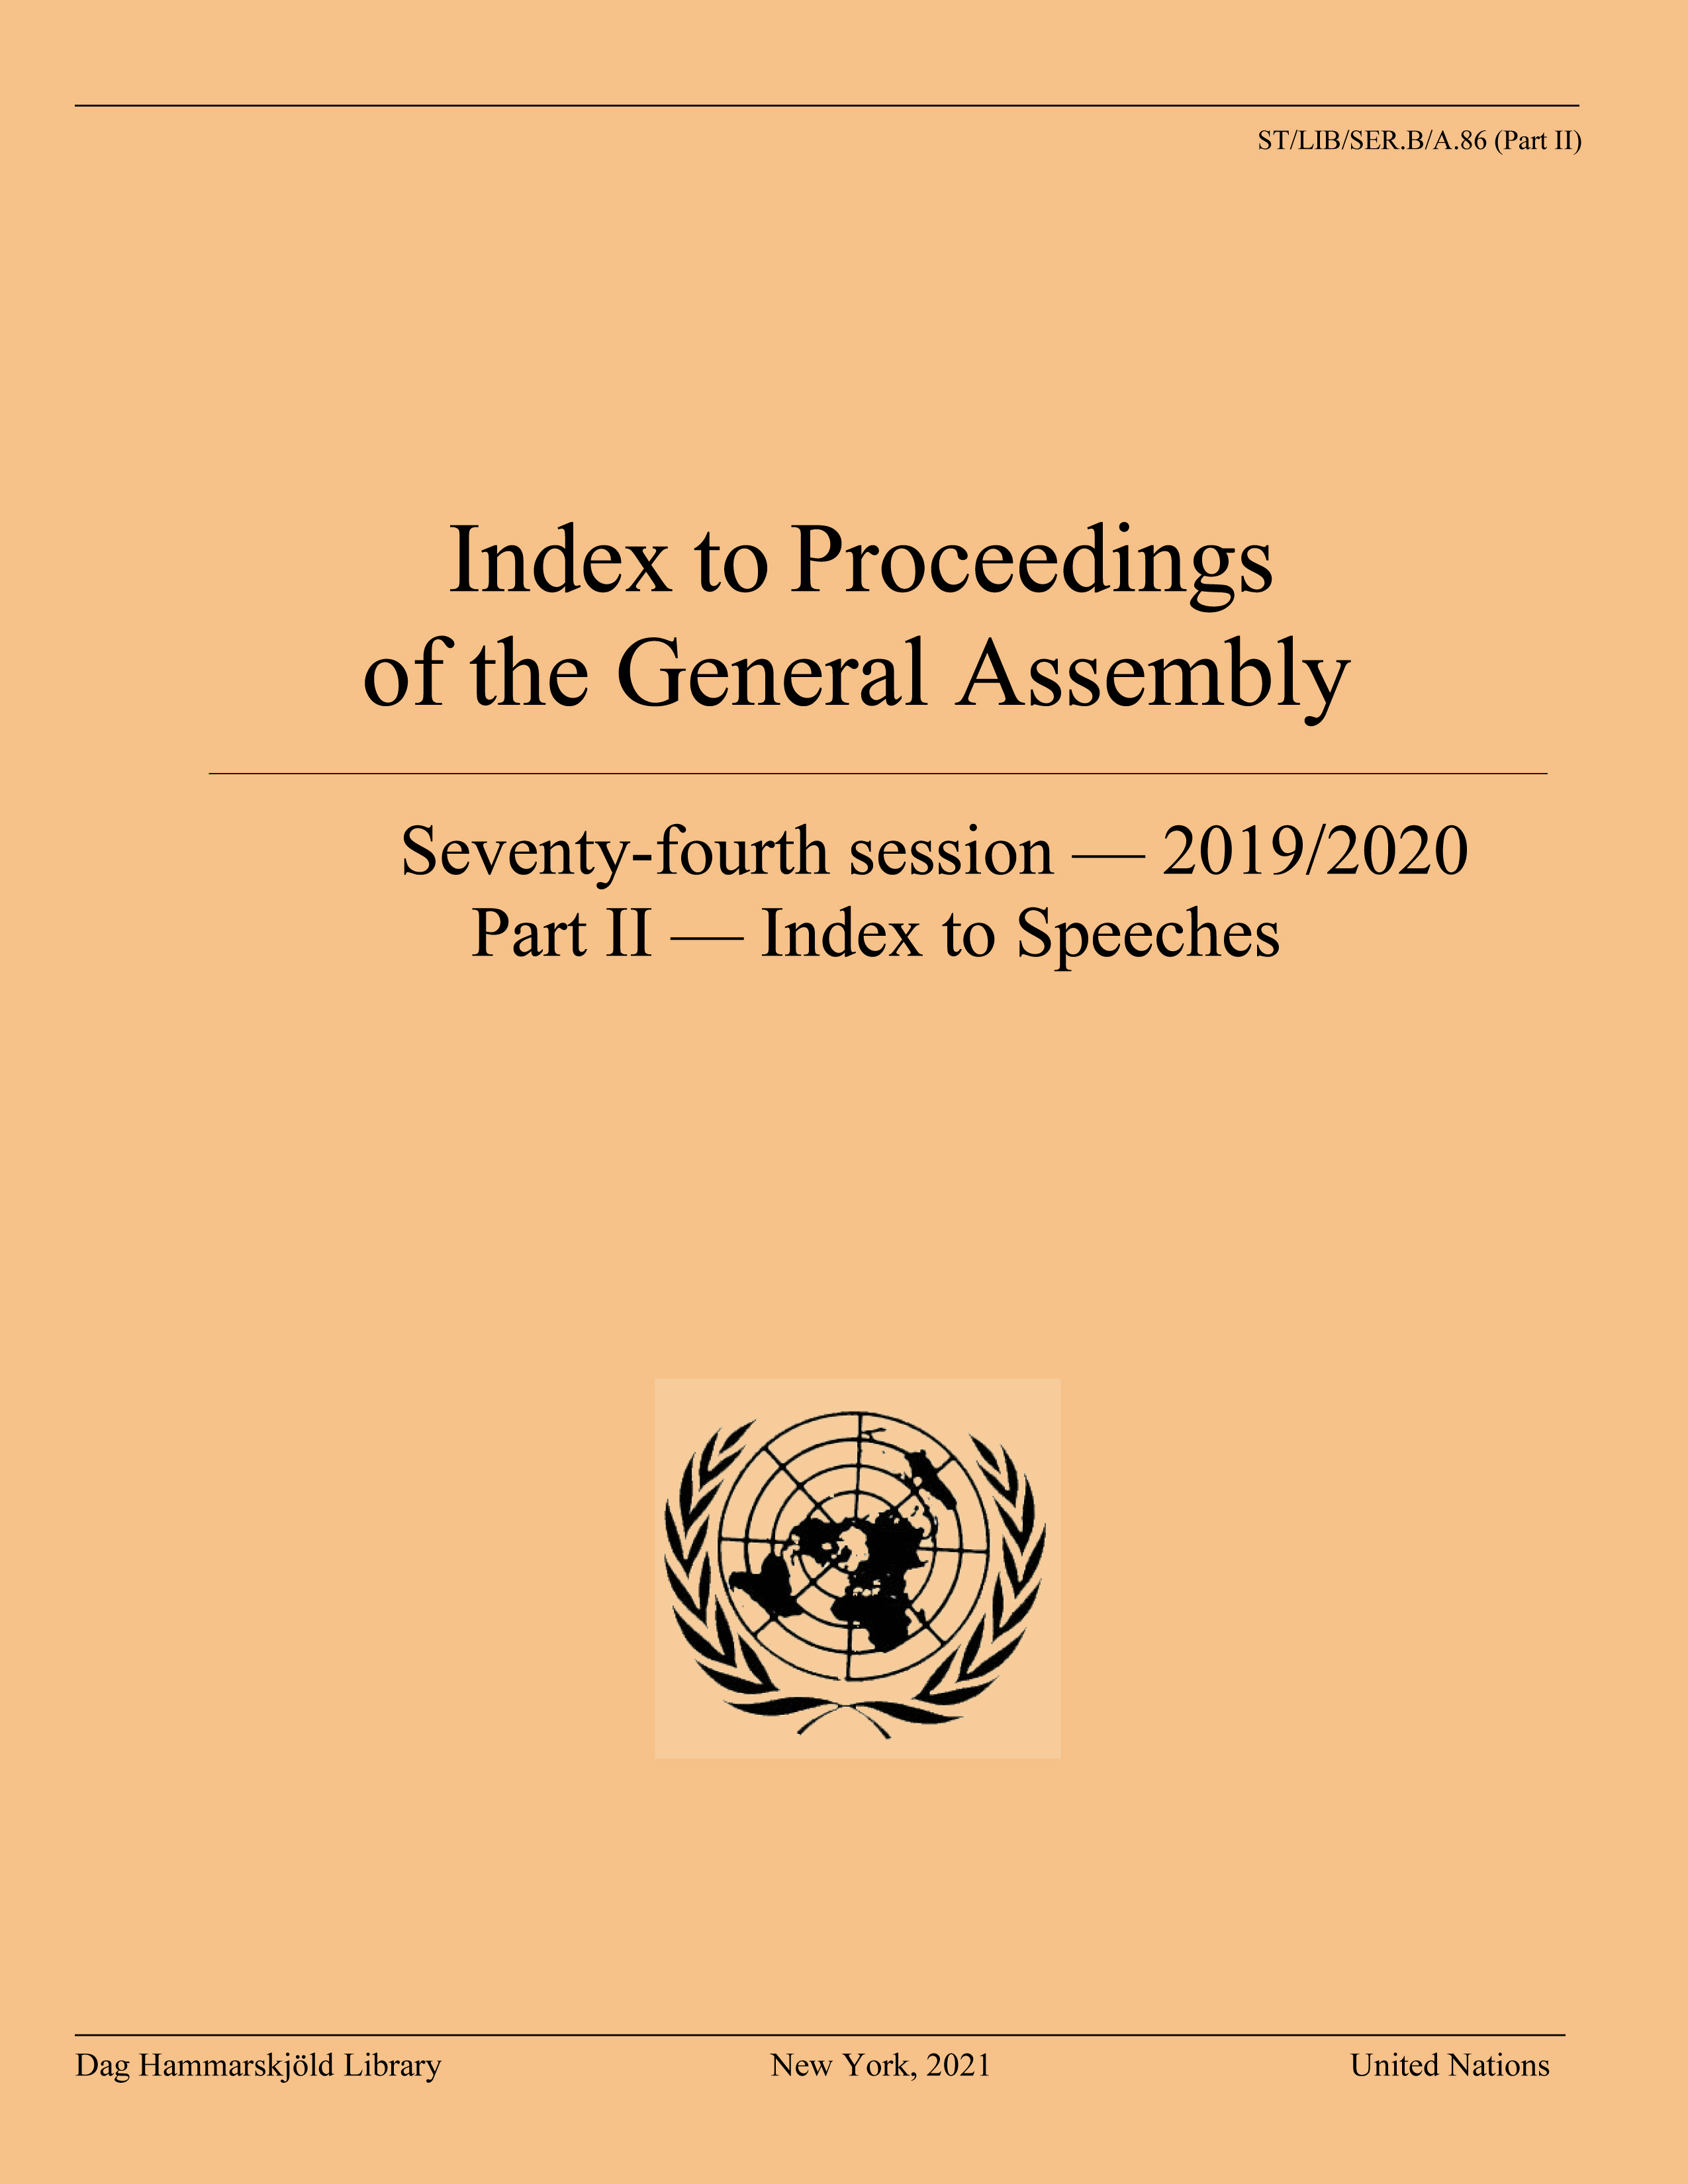 image of Index to Proceedings of the General Assembly 2019/2020